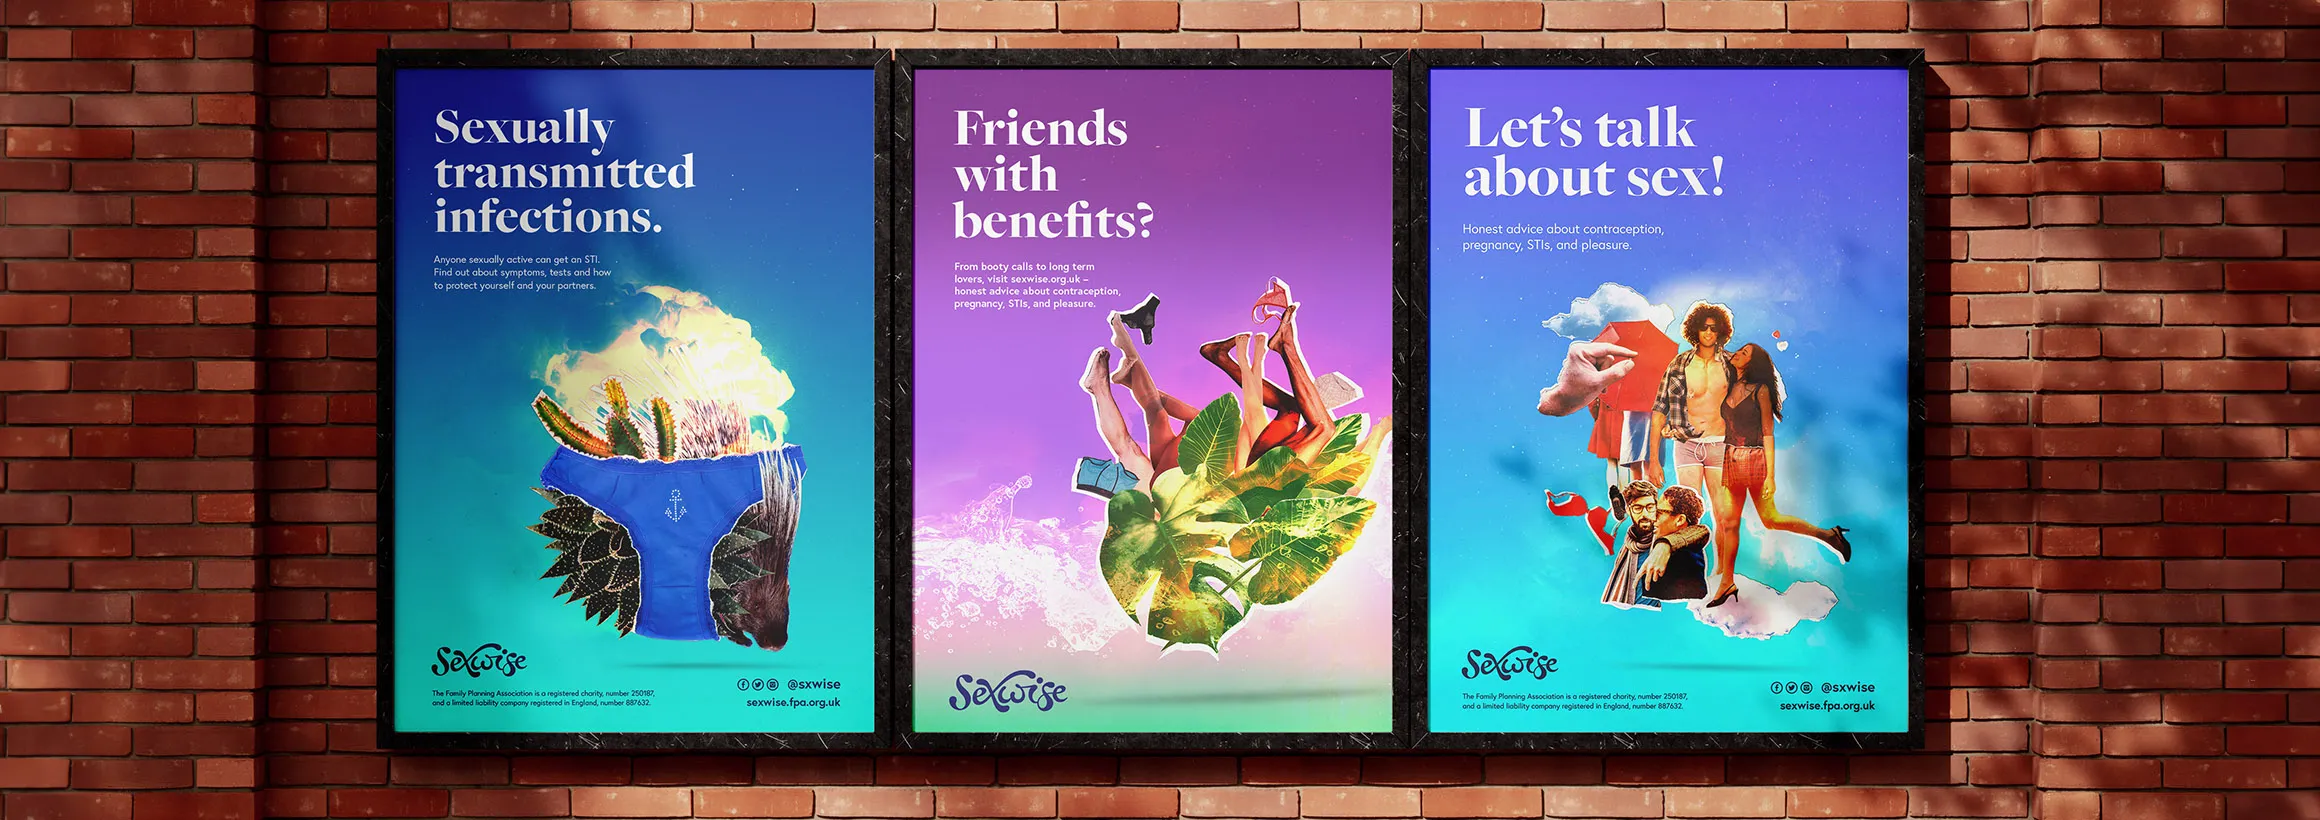 Sexwise posters